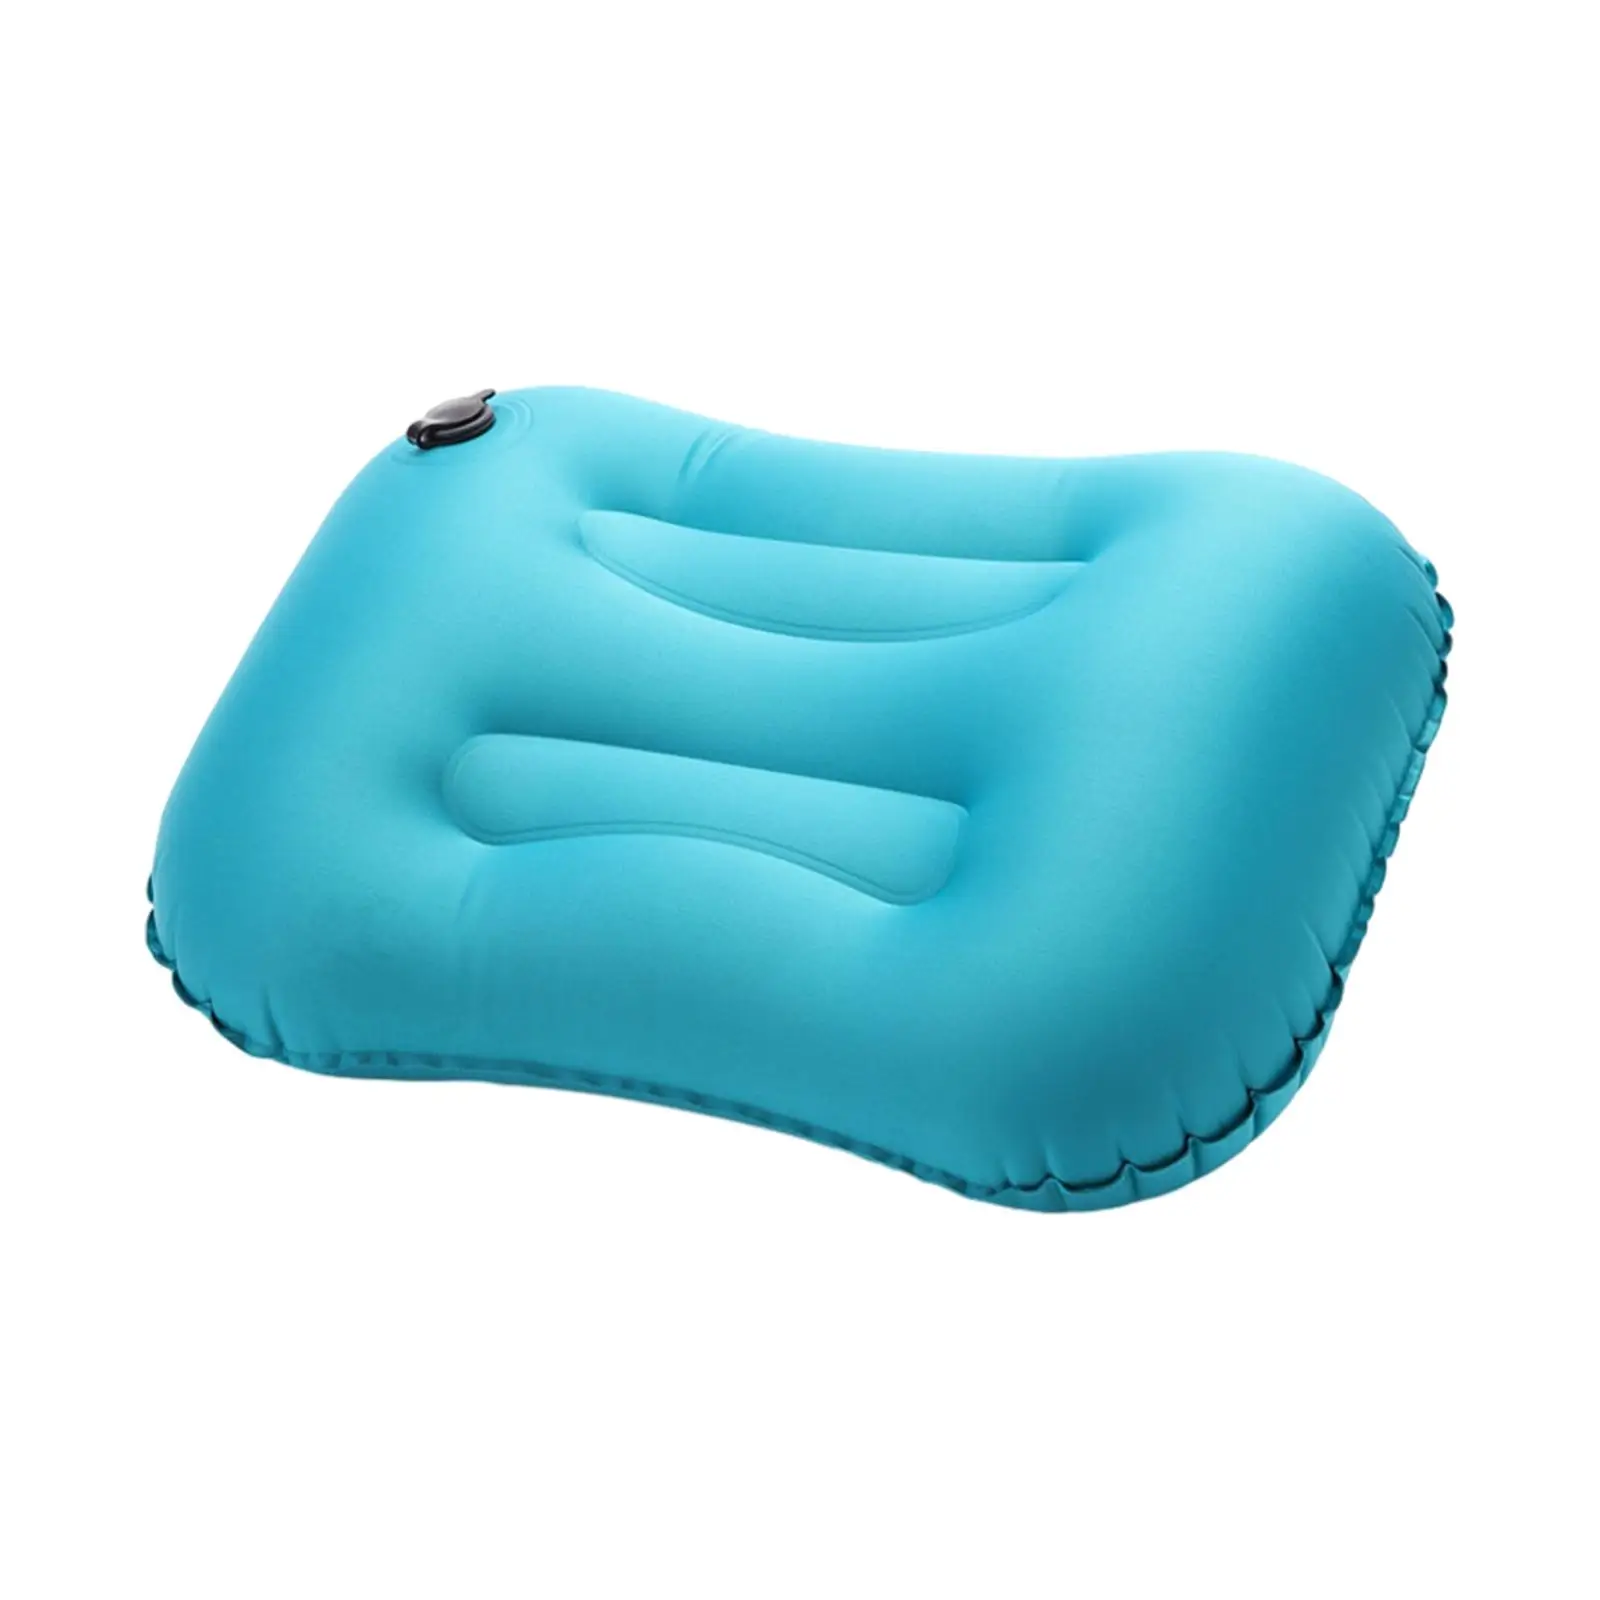 Camping Inflatable Pillow Portable Cushion for Neck Support Compressible Pillow for Nap Rest Beach Backpacking Hiking Hammock